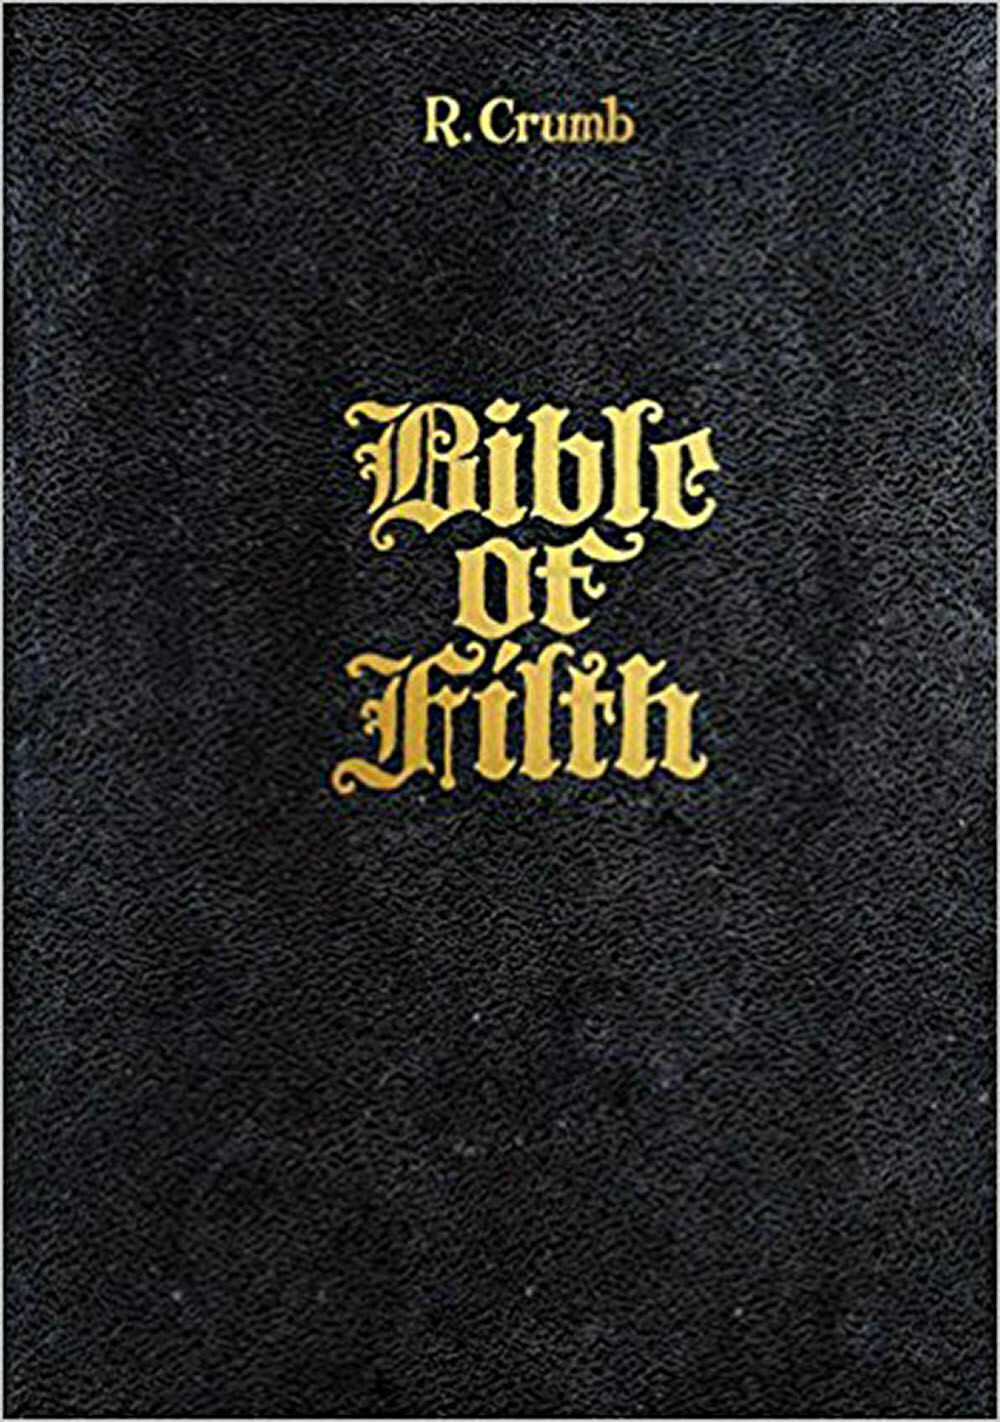 R Crumb: The Bible of Filth